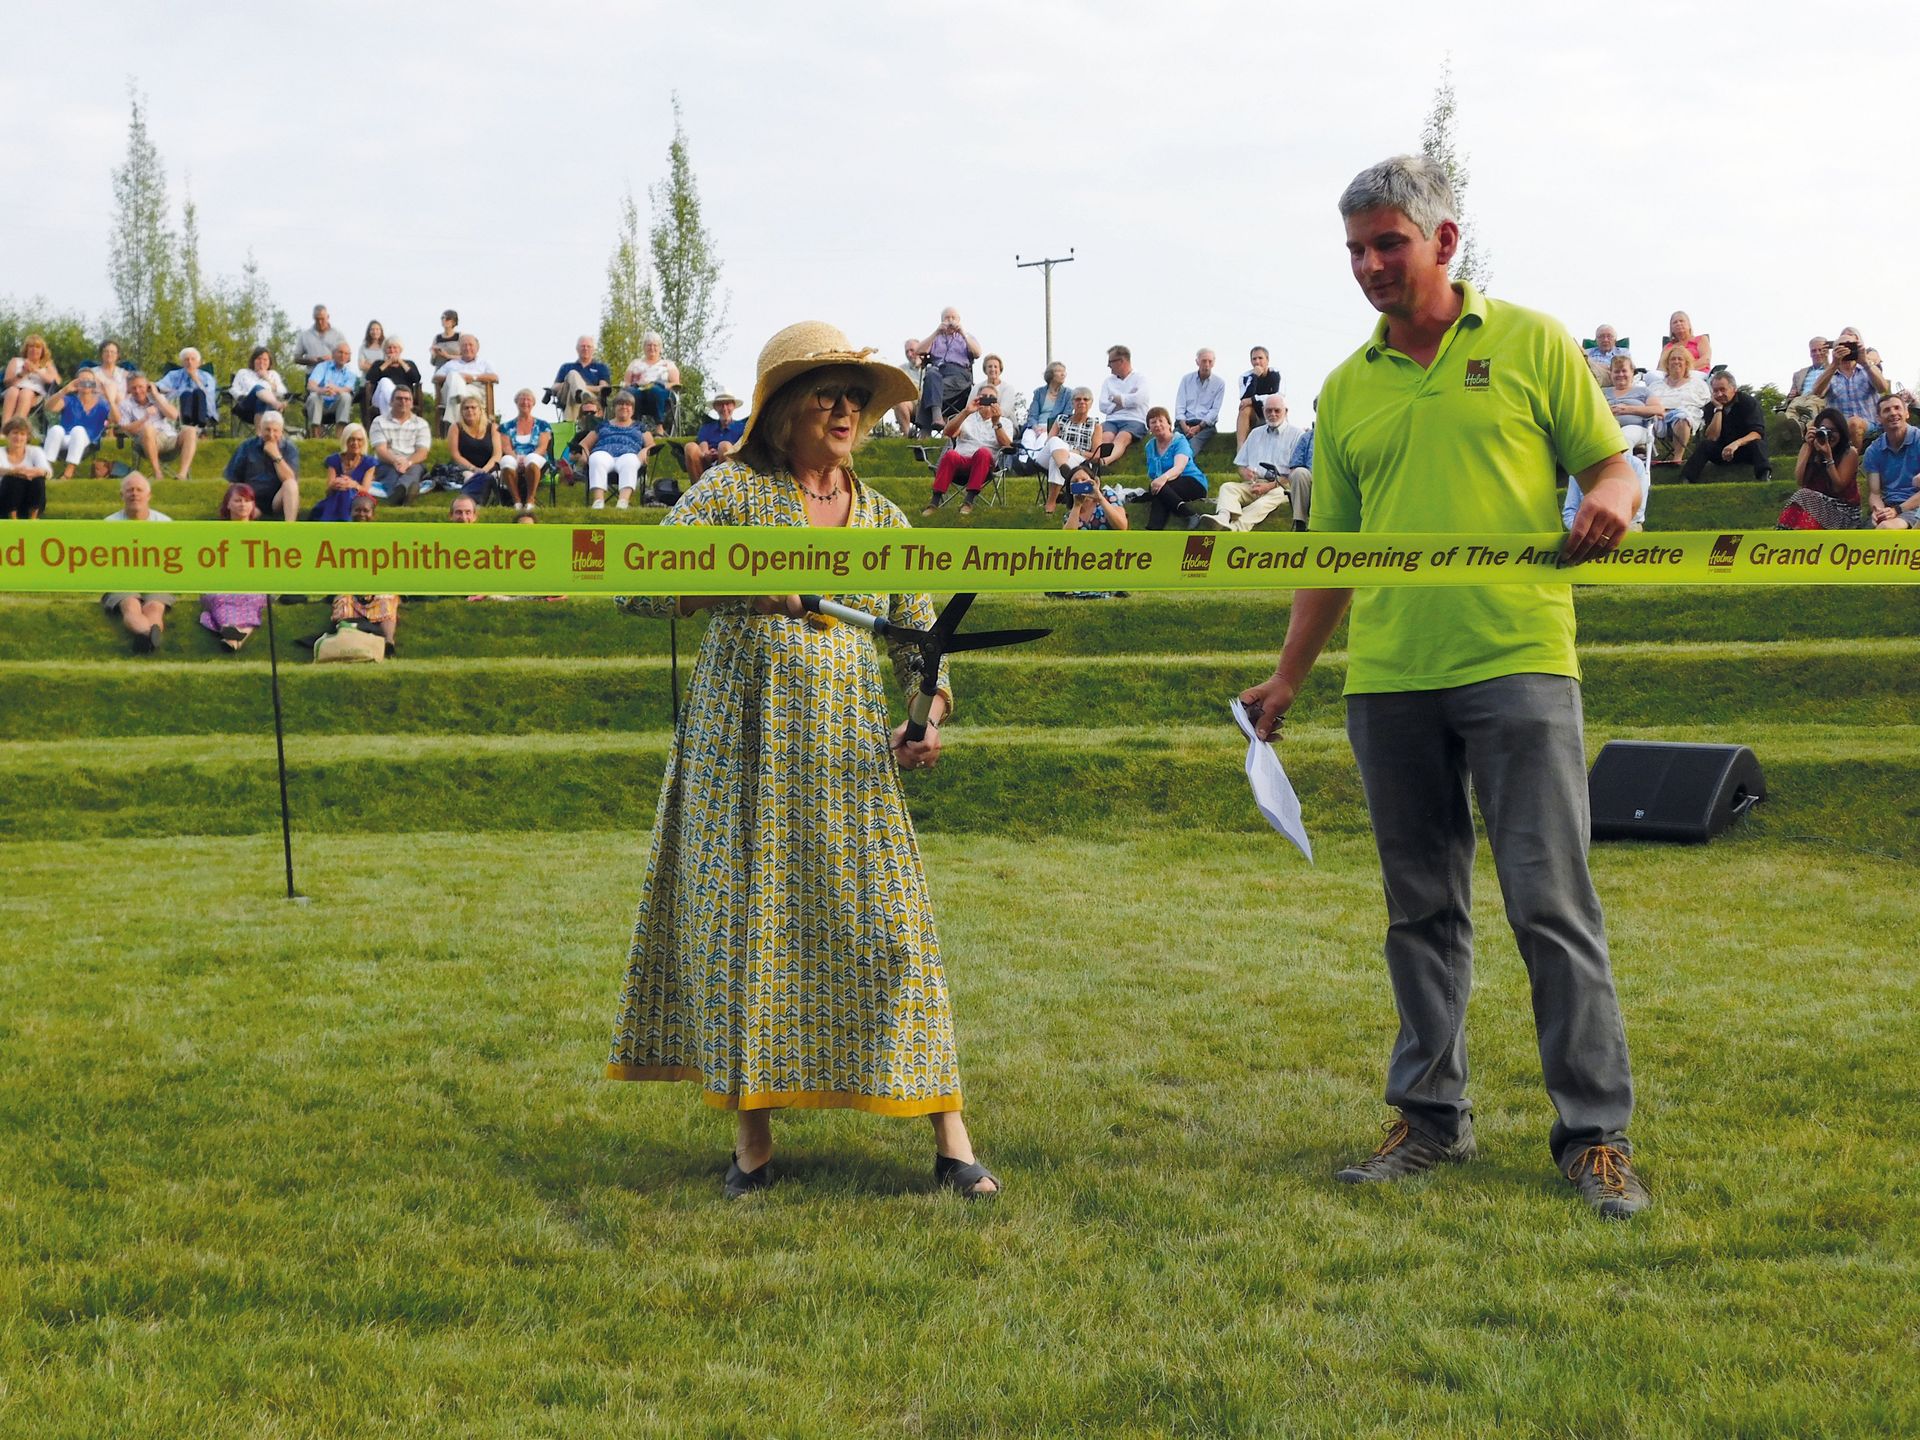 Well known actress Joanna David officially cut the ribbon to open the new grass amphitheatre at Holme